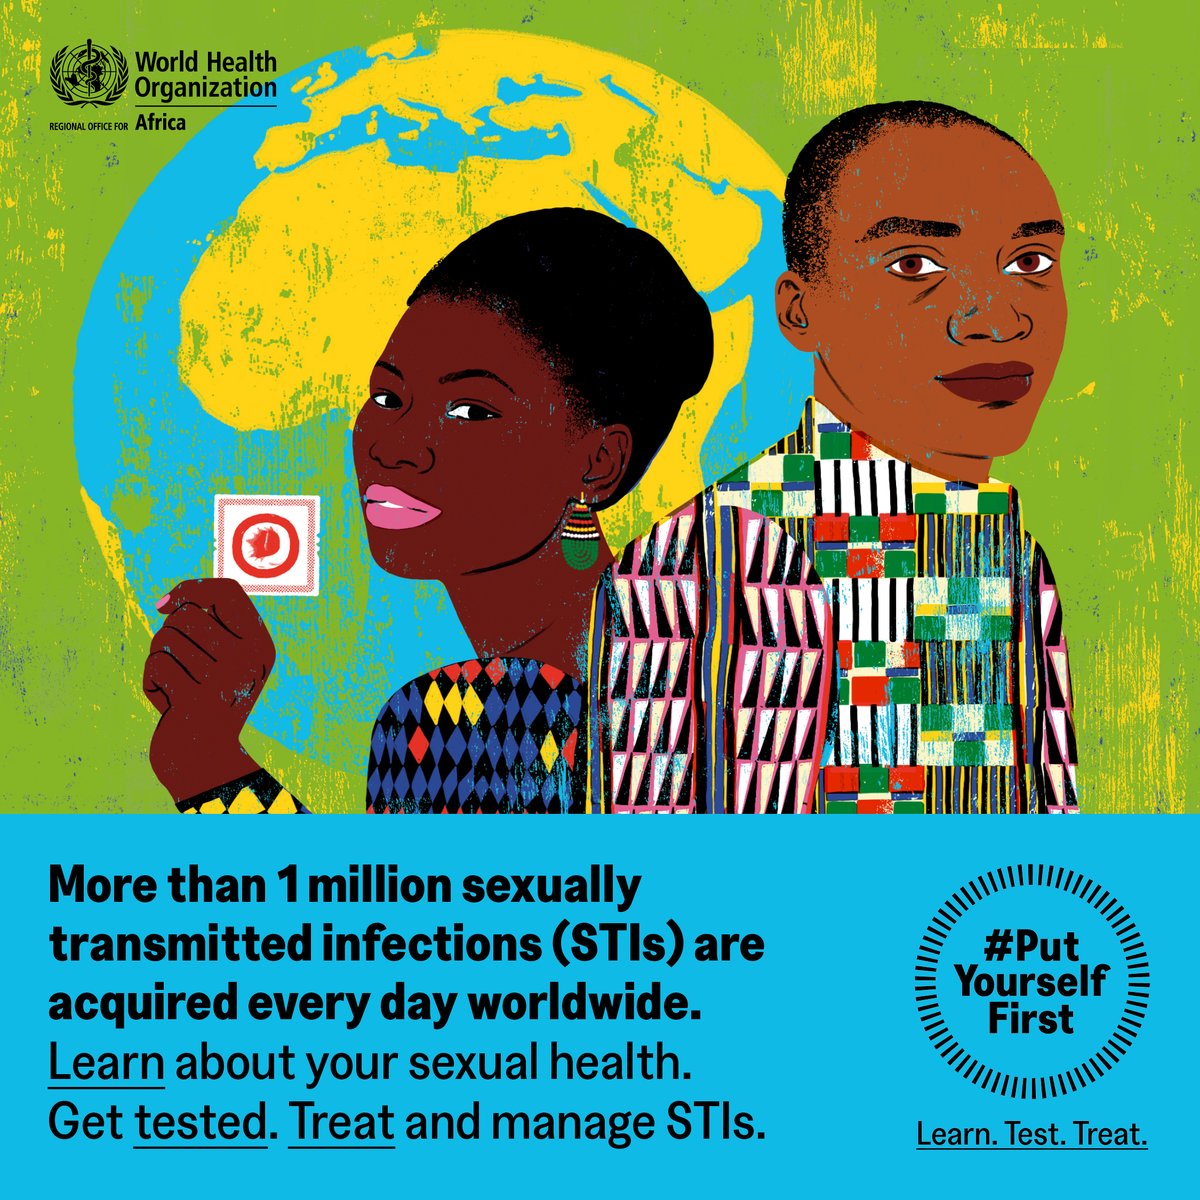 You are in control of your #SexualHealth ✅

#STIs such as #syphilis, #chlamydia & #gonorrhoea are preventable 🚫

Learn how to take care of your sexual health & prevent #STIs ➡️ afro.who.int/PutYourselfFir…   

#WorldSexualHealthDay